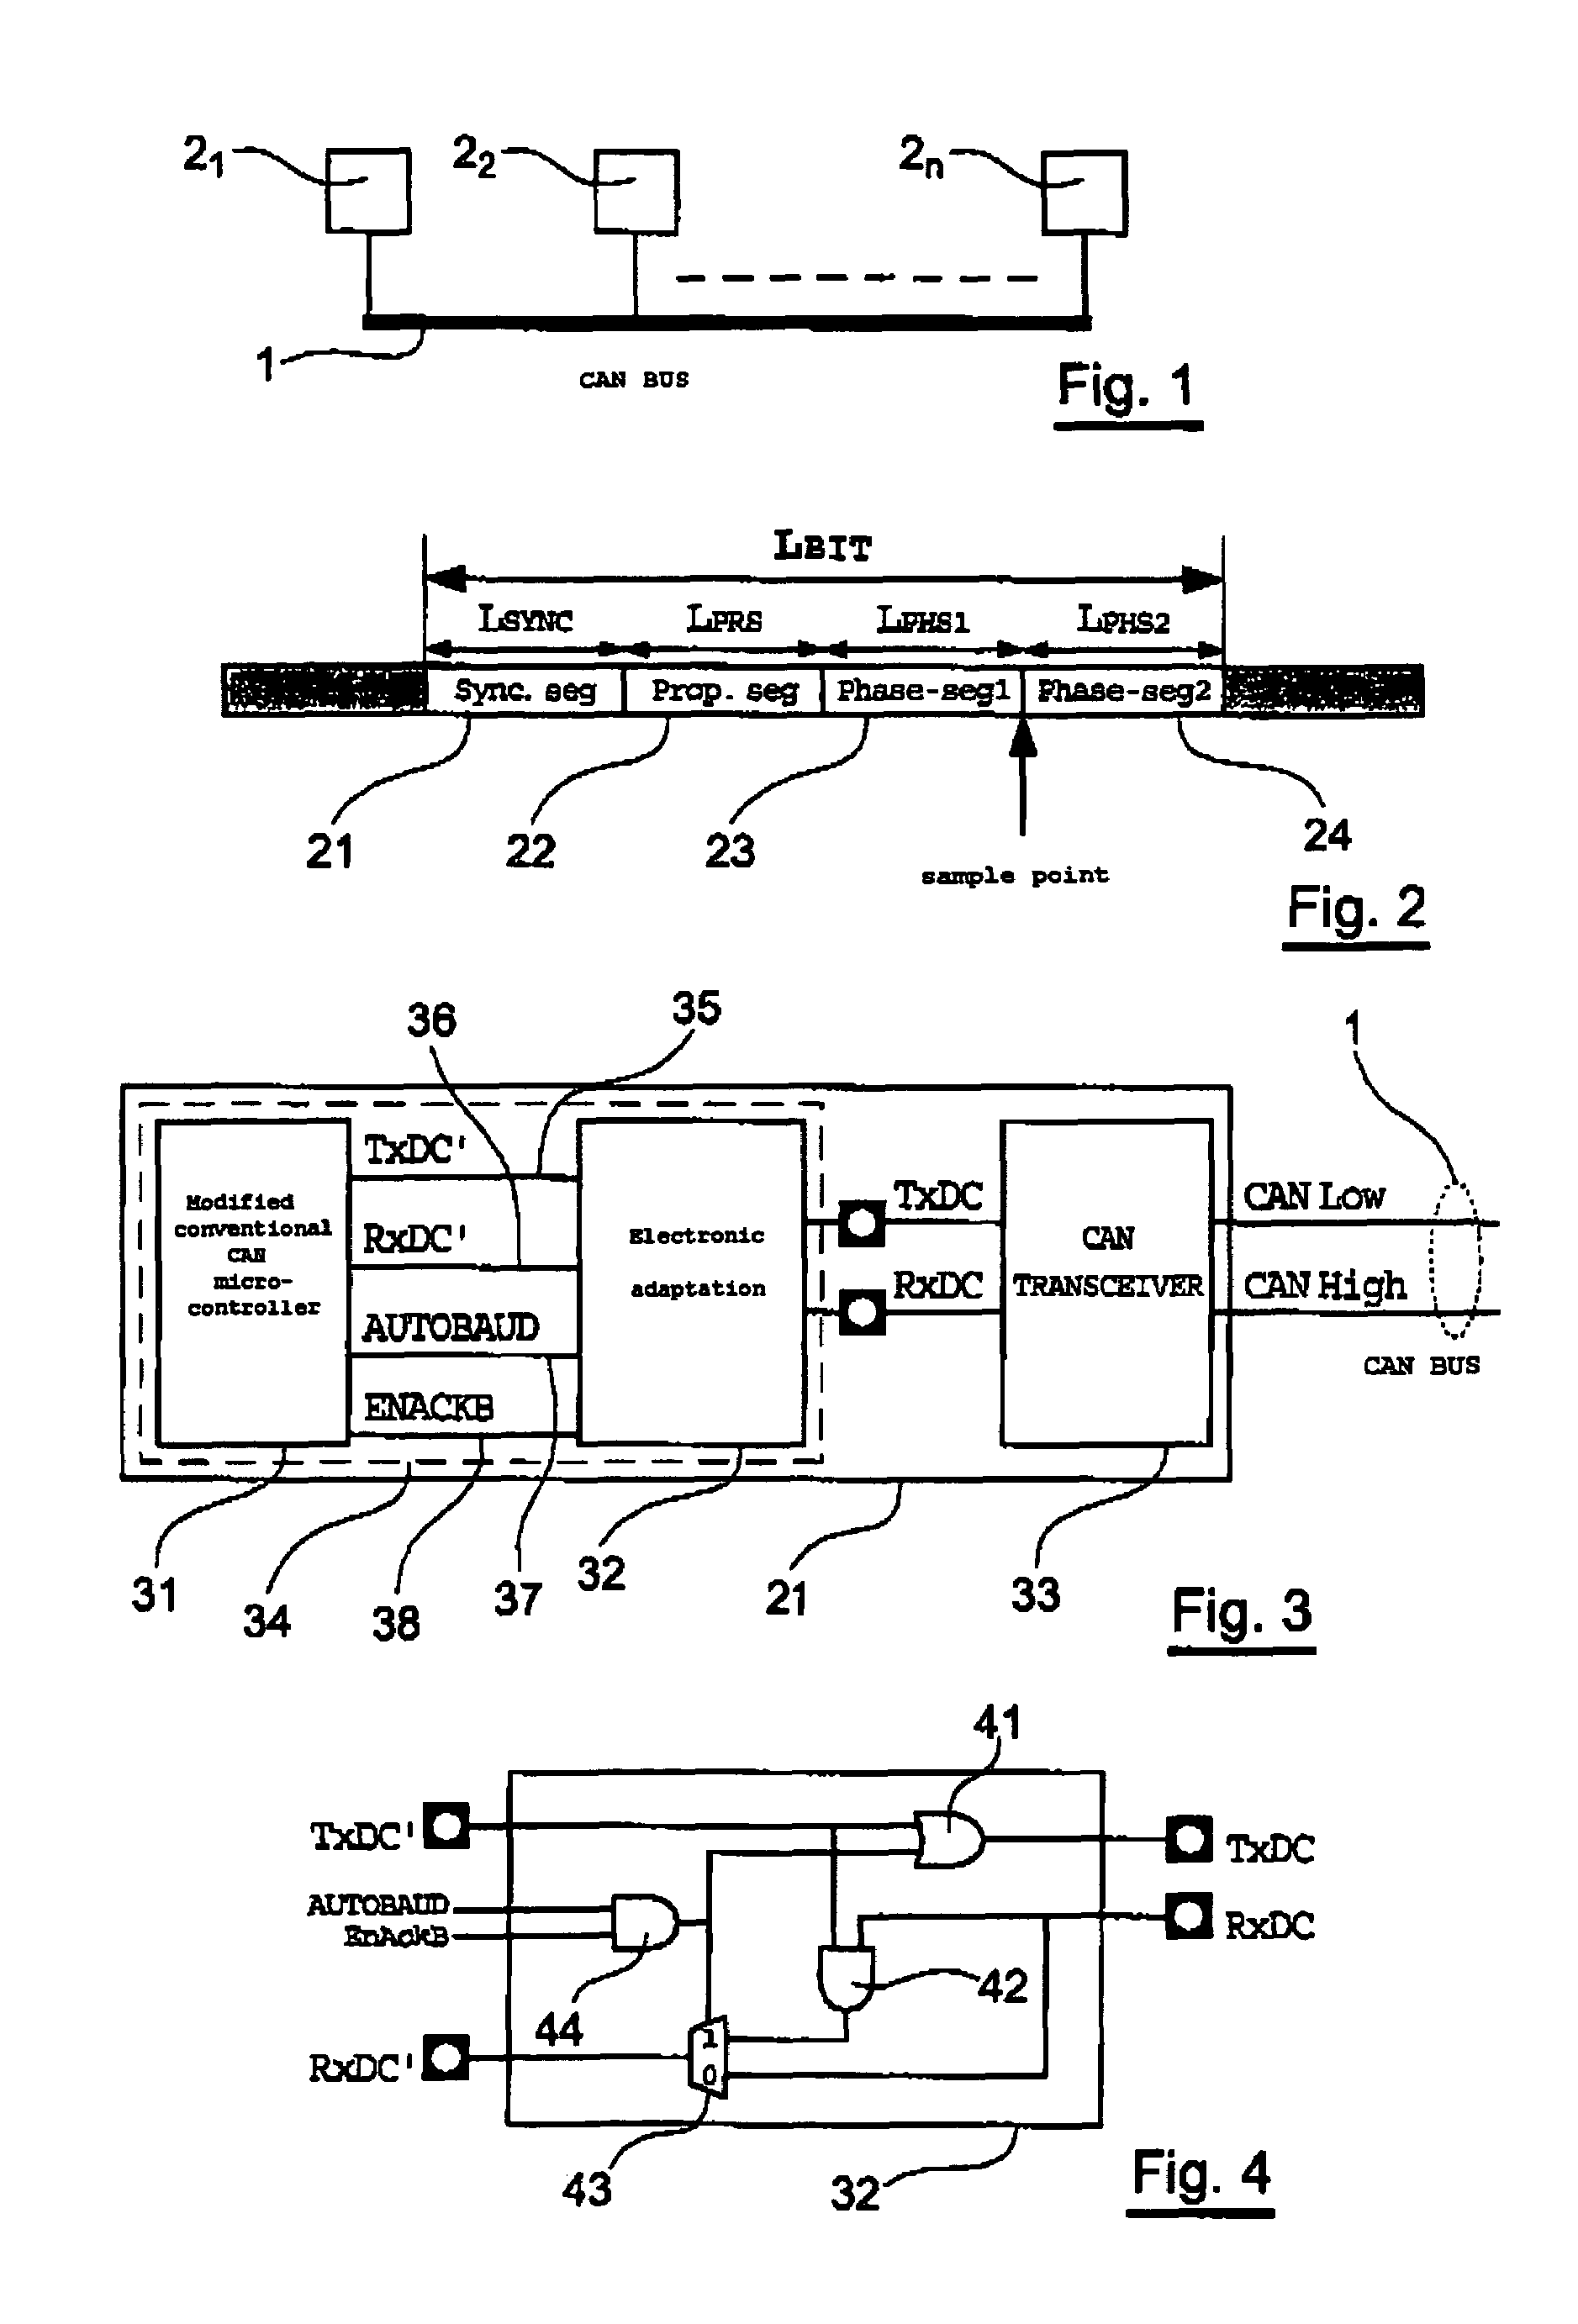 Process for automatically detecting the throughput of a network, particularly of the can bus type and for configuring with the detected throughput by transition analysis, and corresponding device